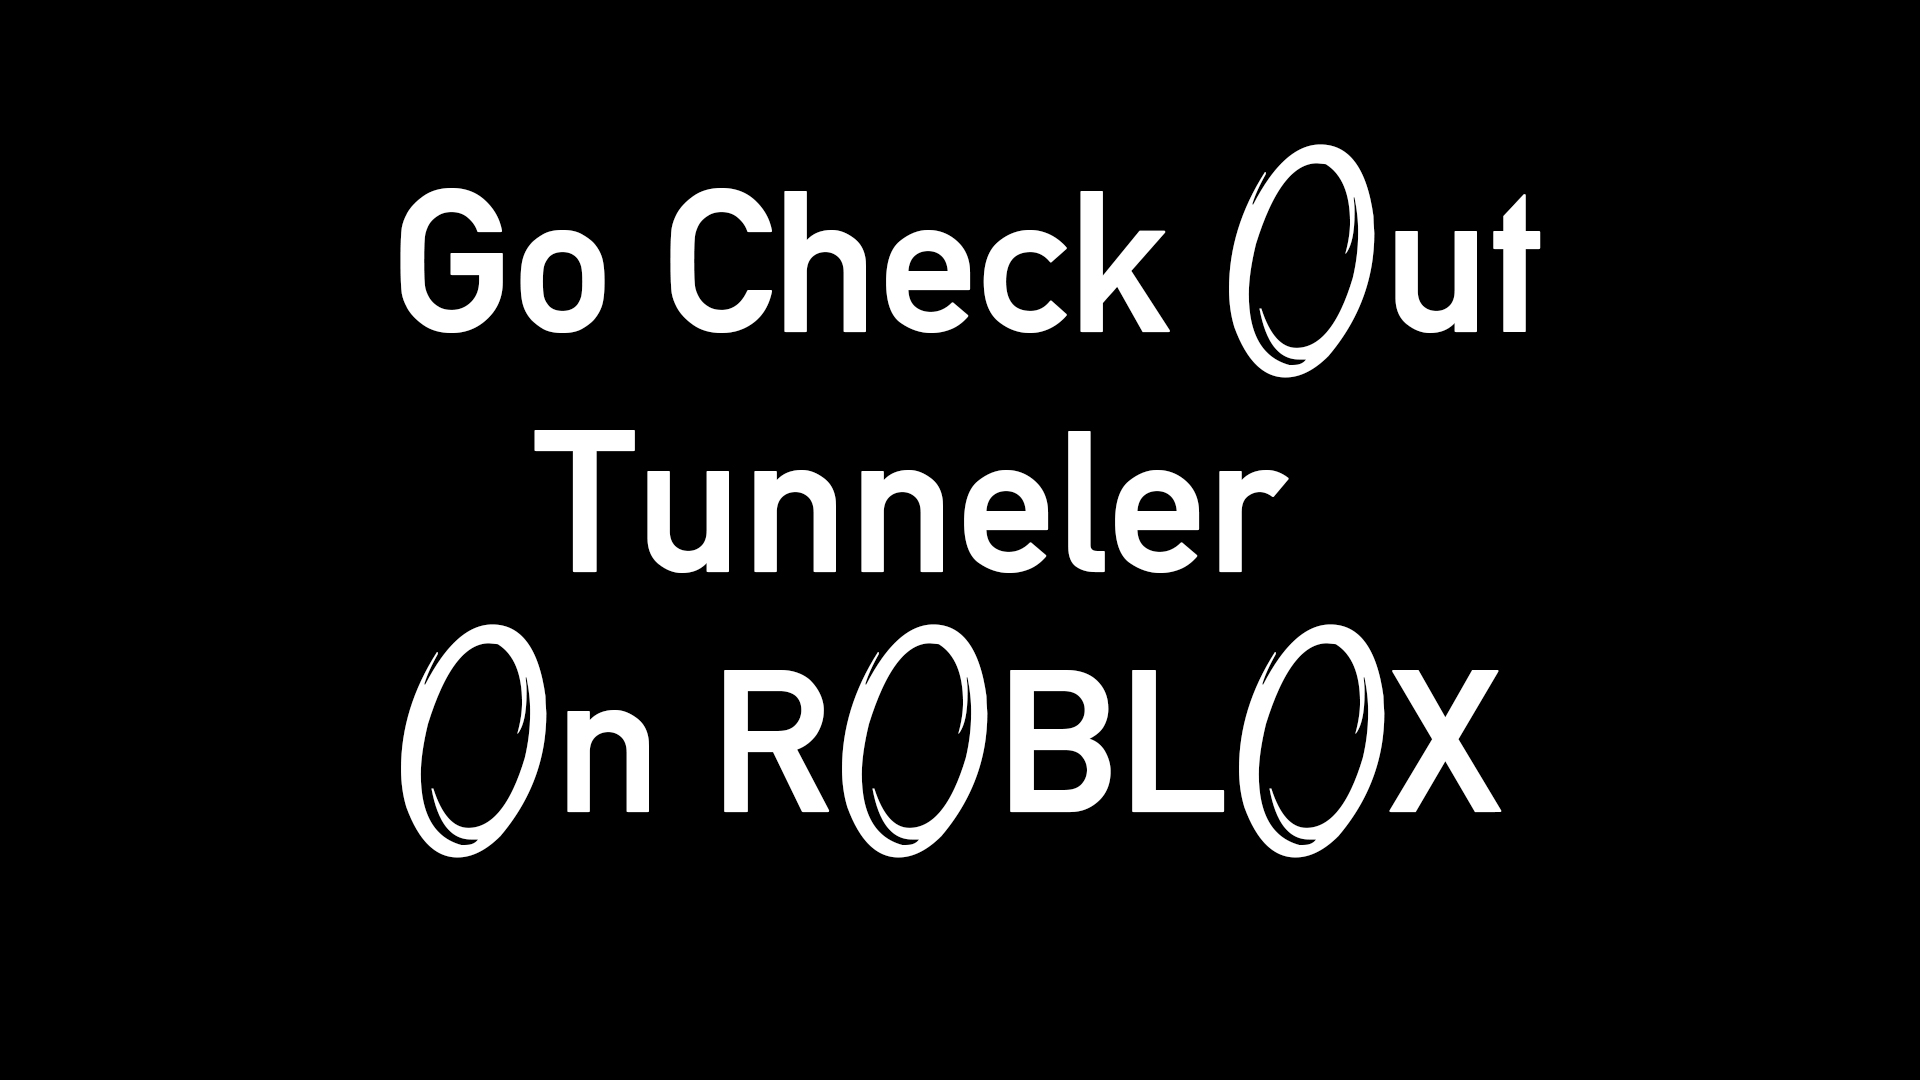 Go Check Out 3 Image Tunneler Source Better Page Mod For Portal 2 Mod Db - portal 2 roblox